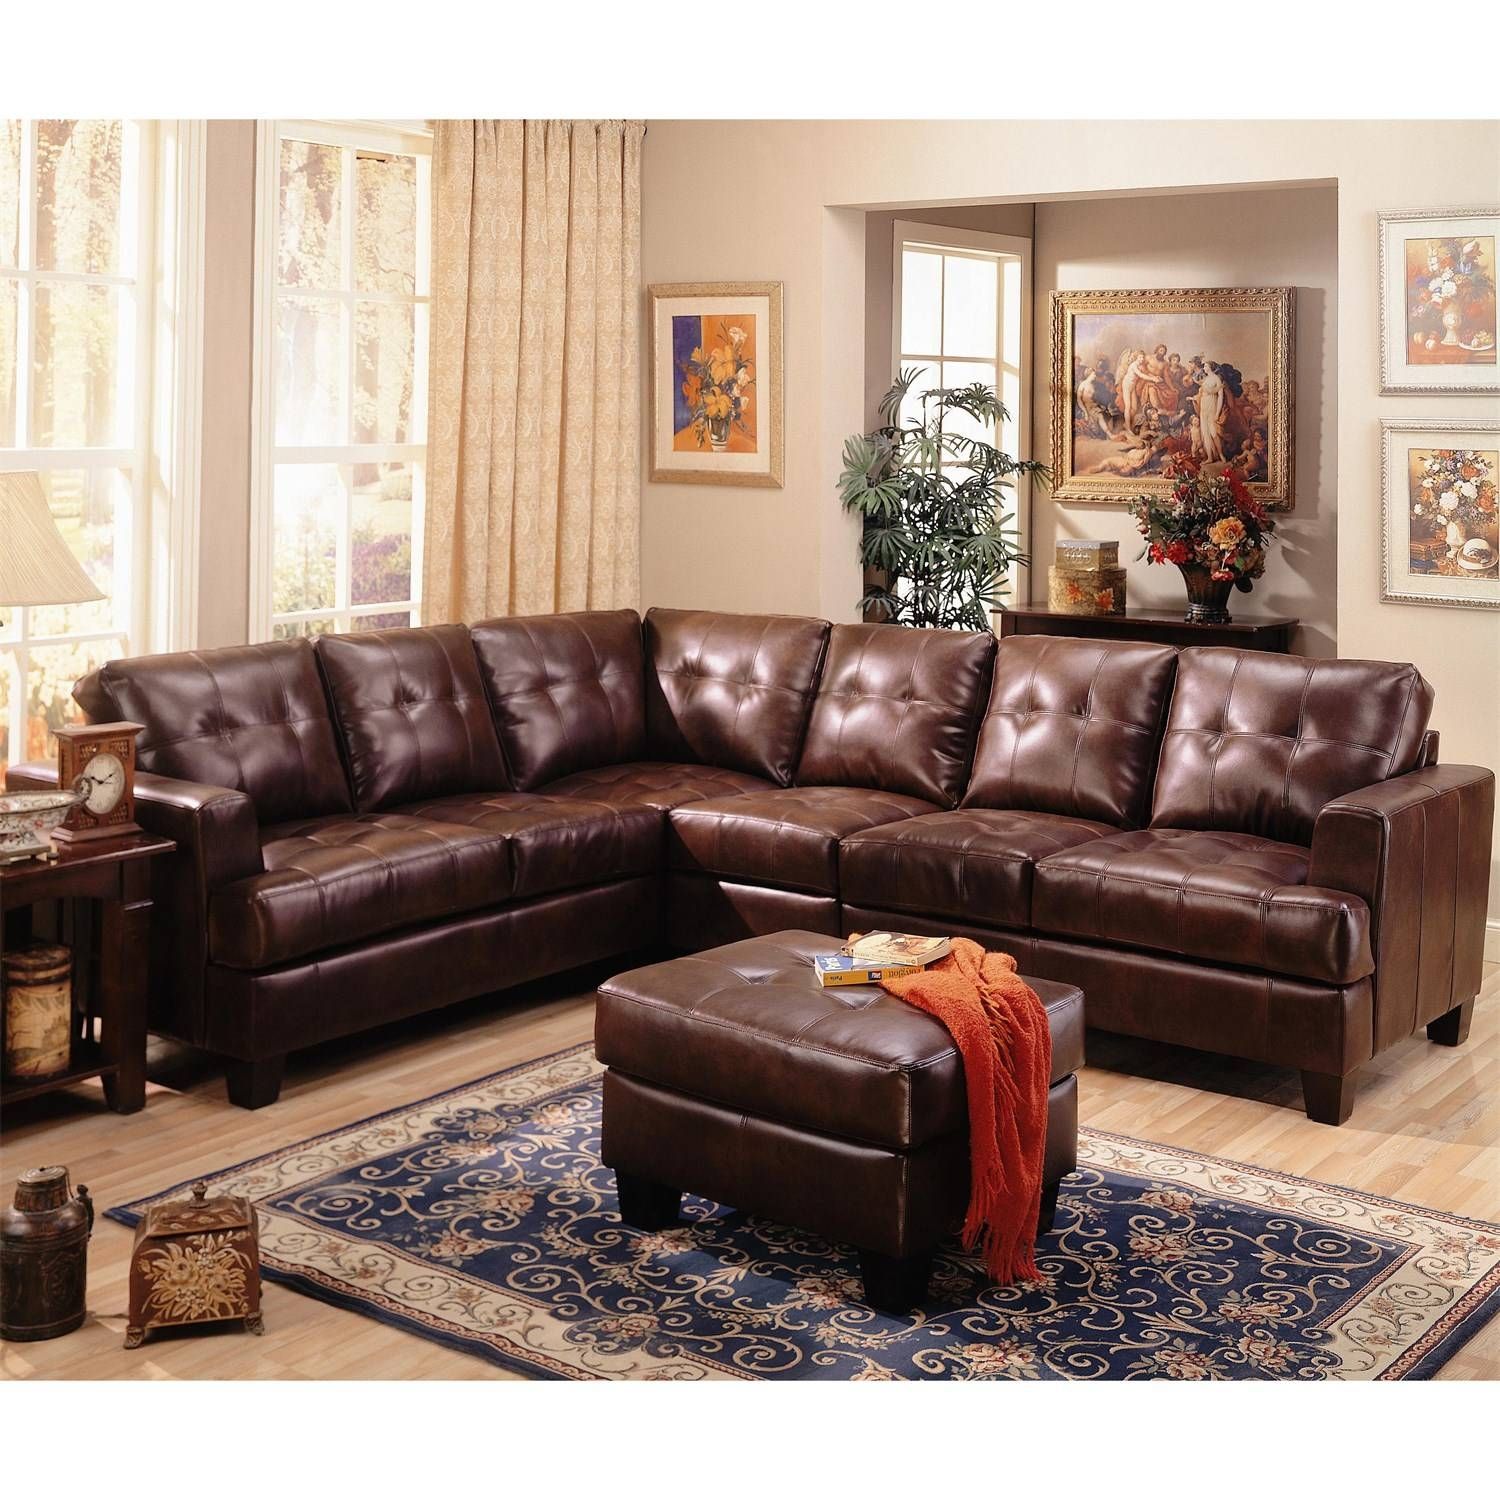 Living Room: Captivating Coaster Sectional Design For Your Lovely Inside Chenille And Leather Sectional Sofa (View 29 of 30)